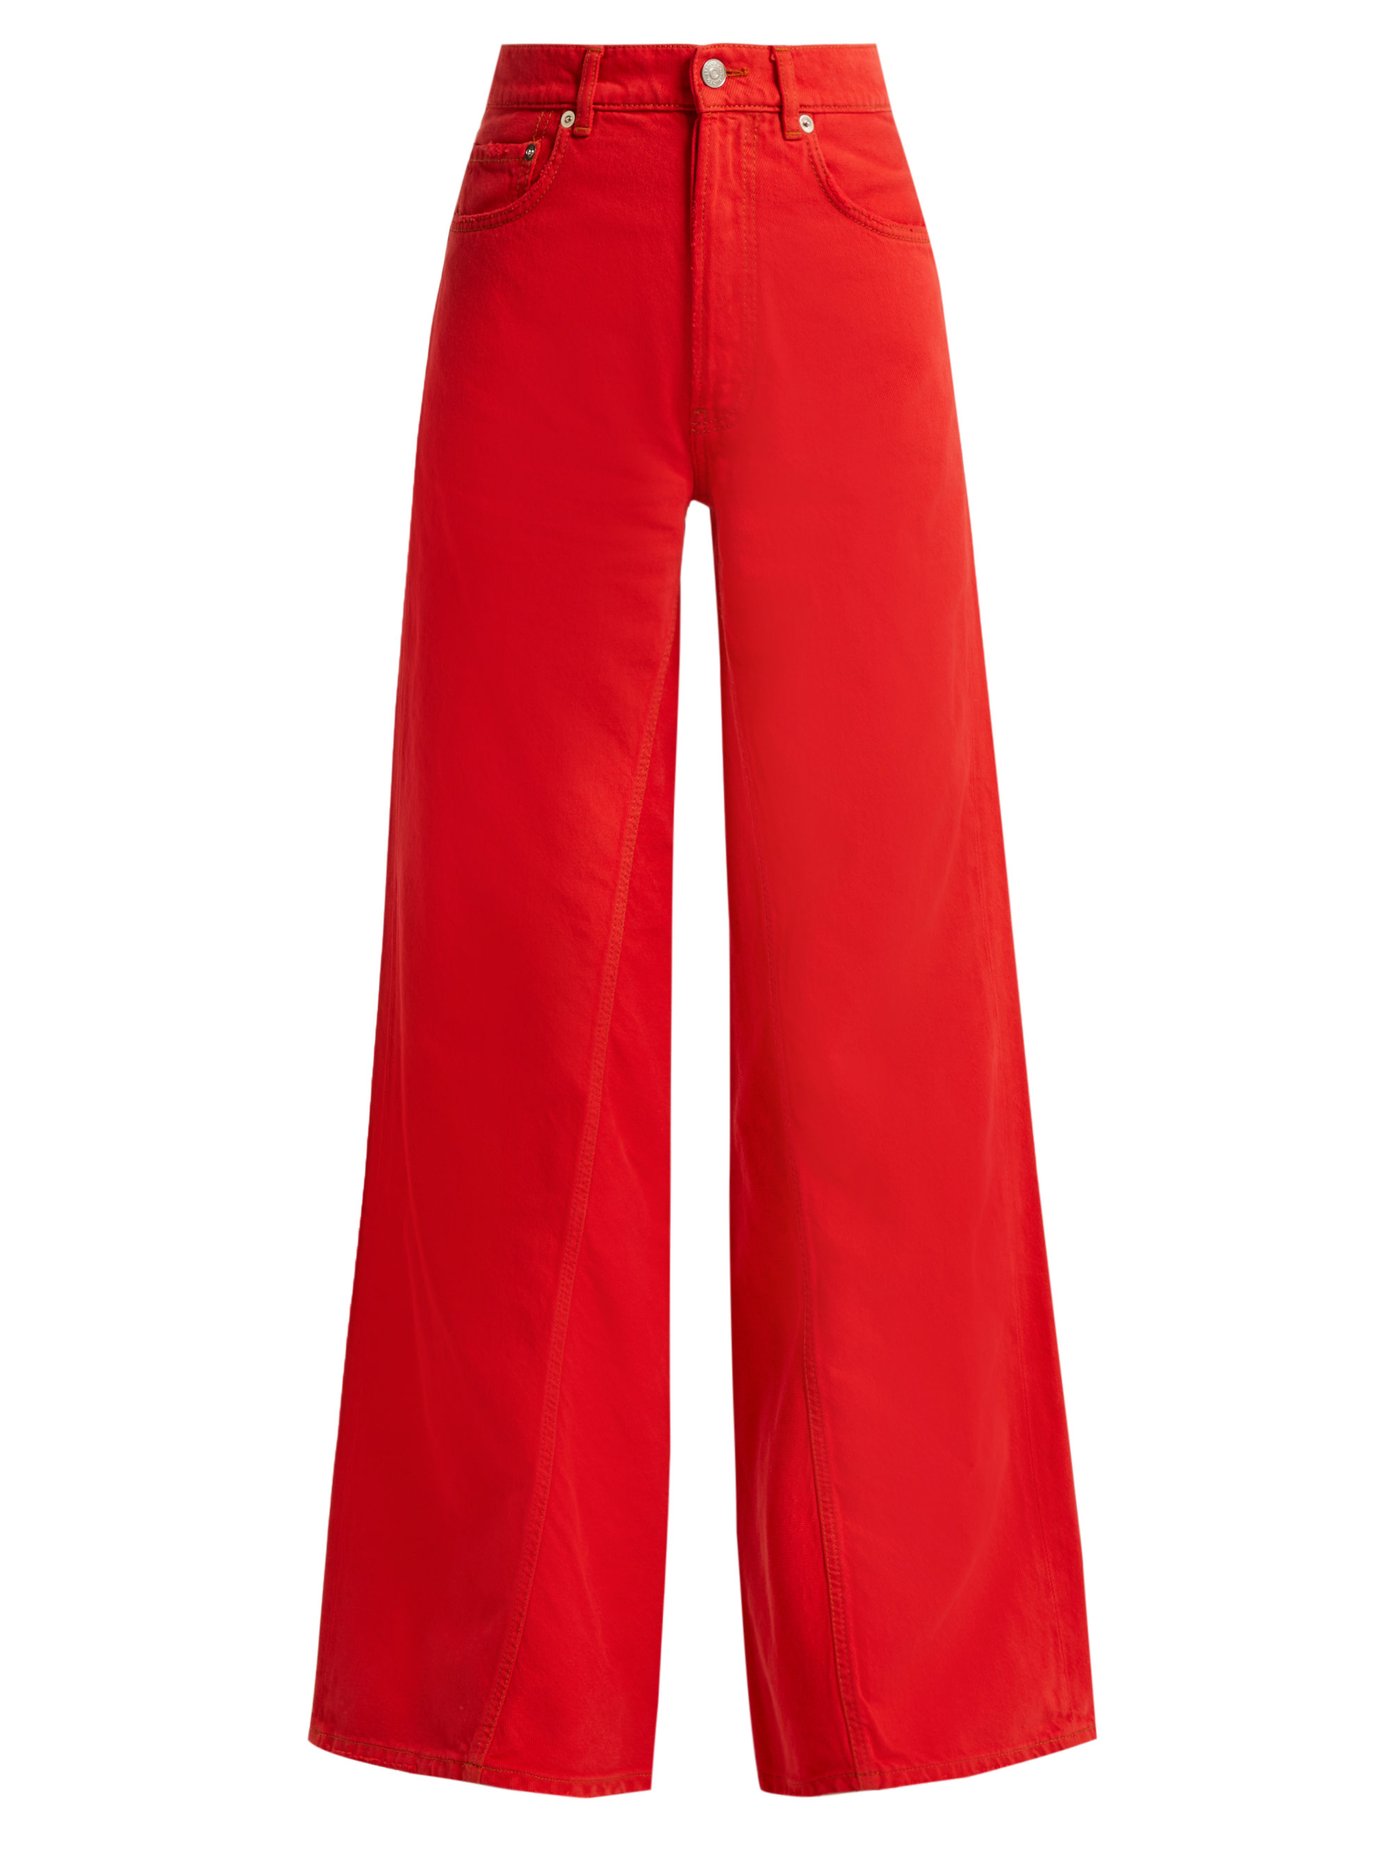 red jeans uk